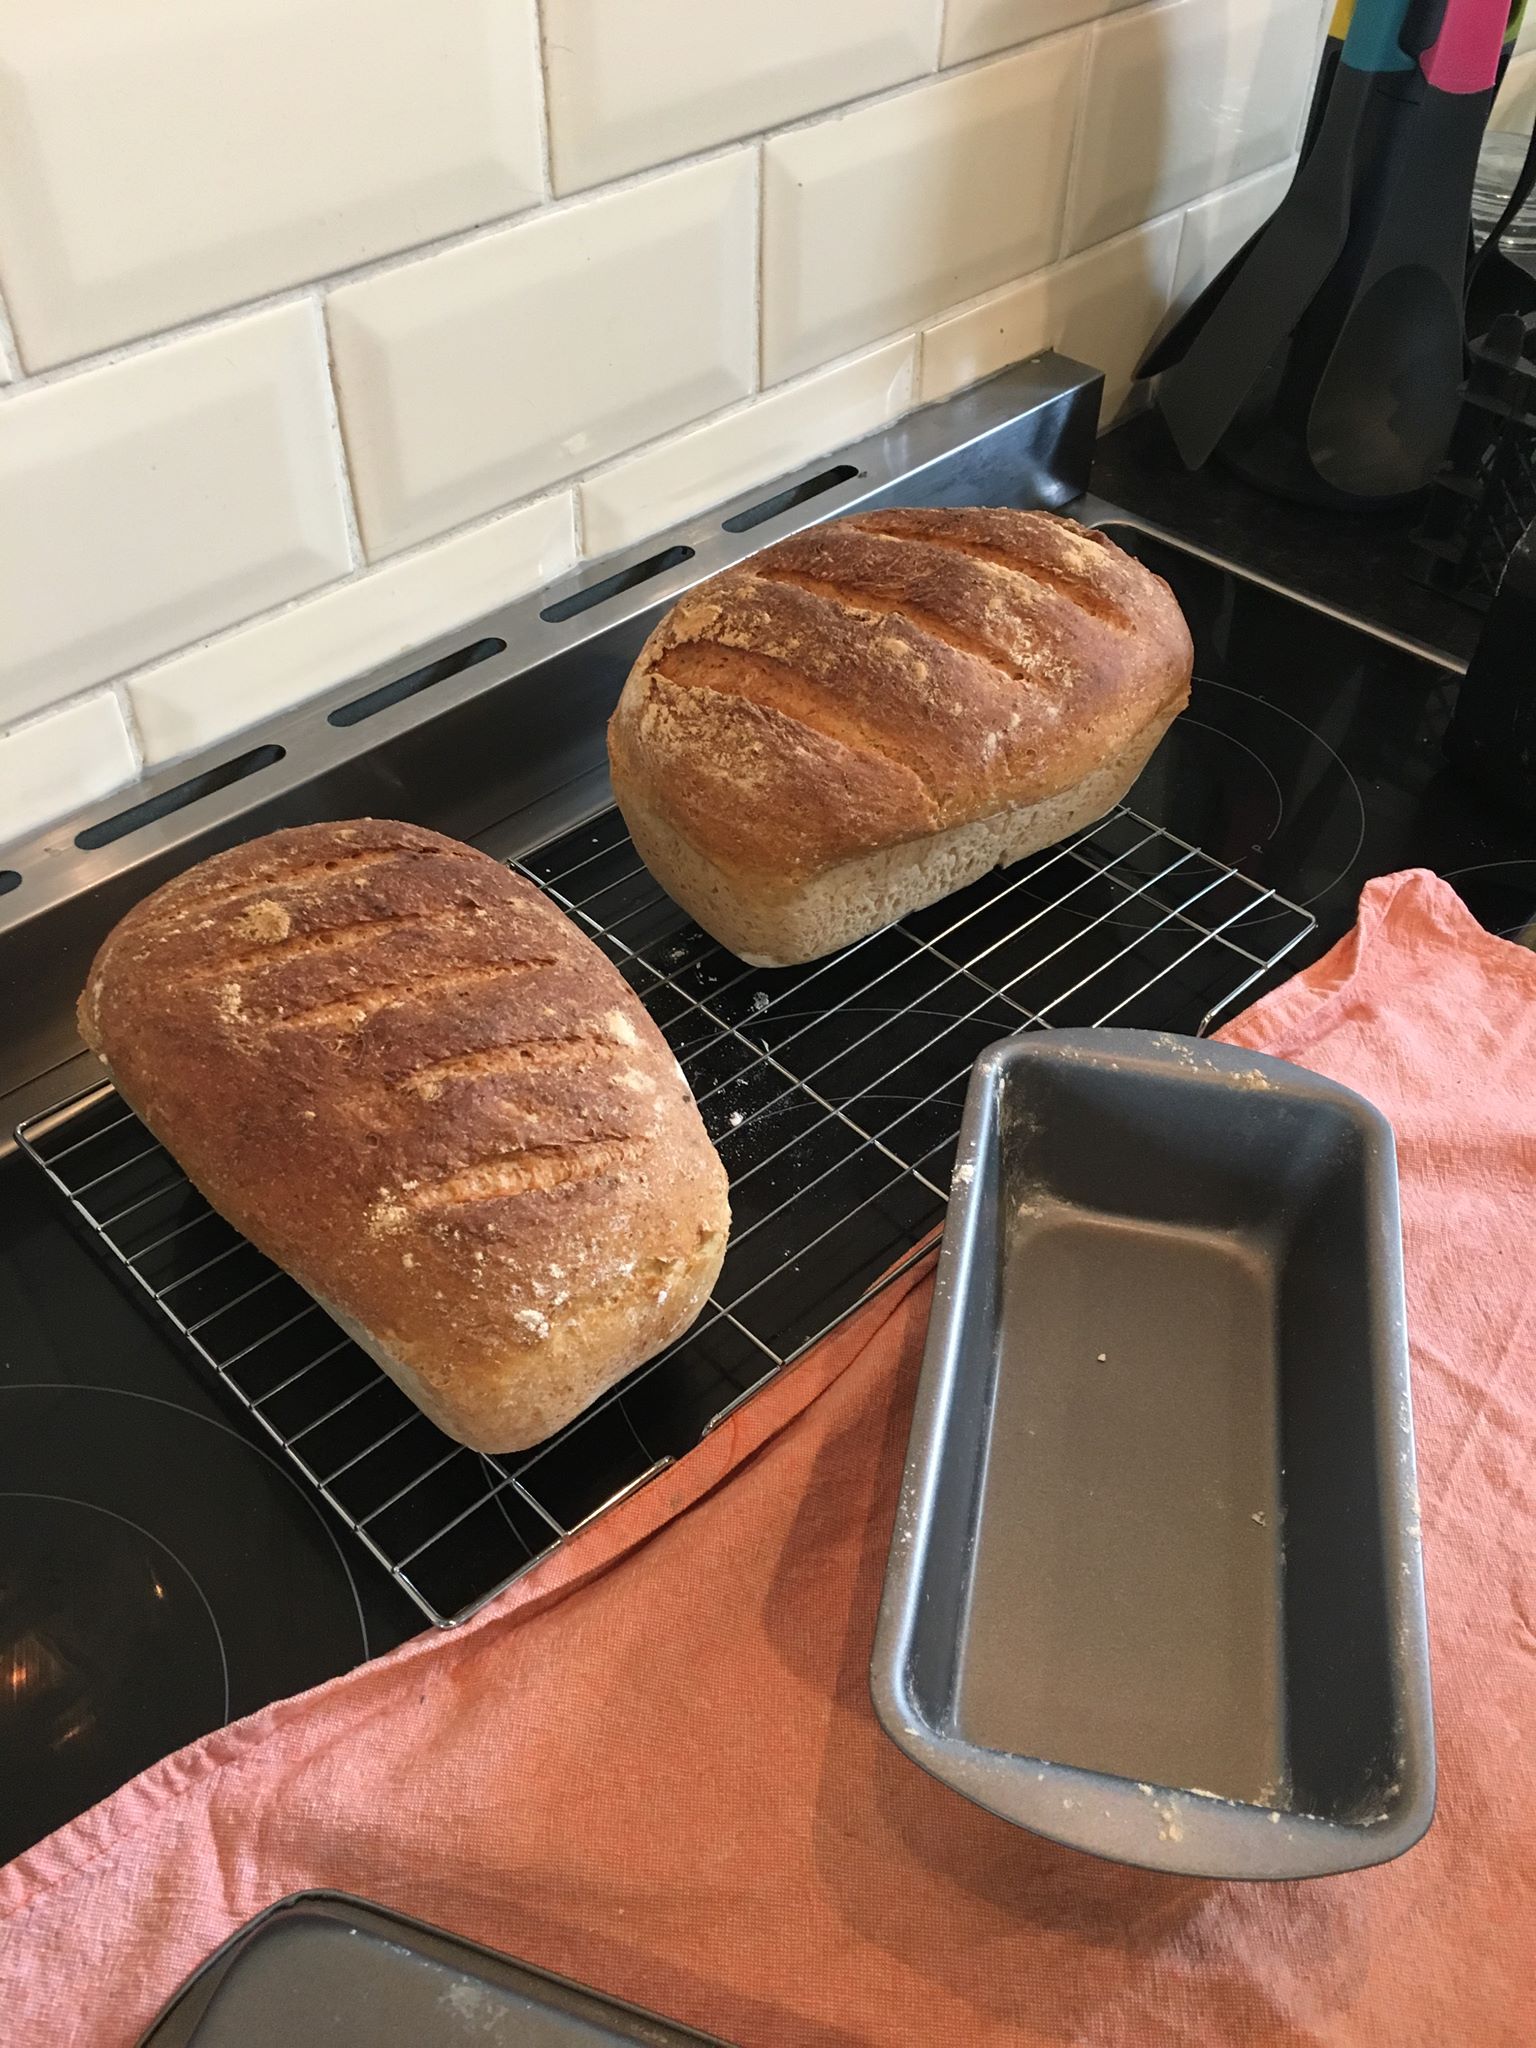 two finished loaves, wholemeal and plain white flour